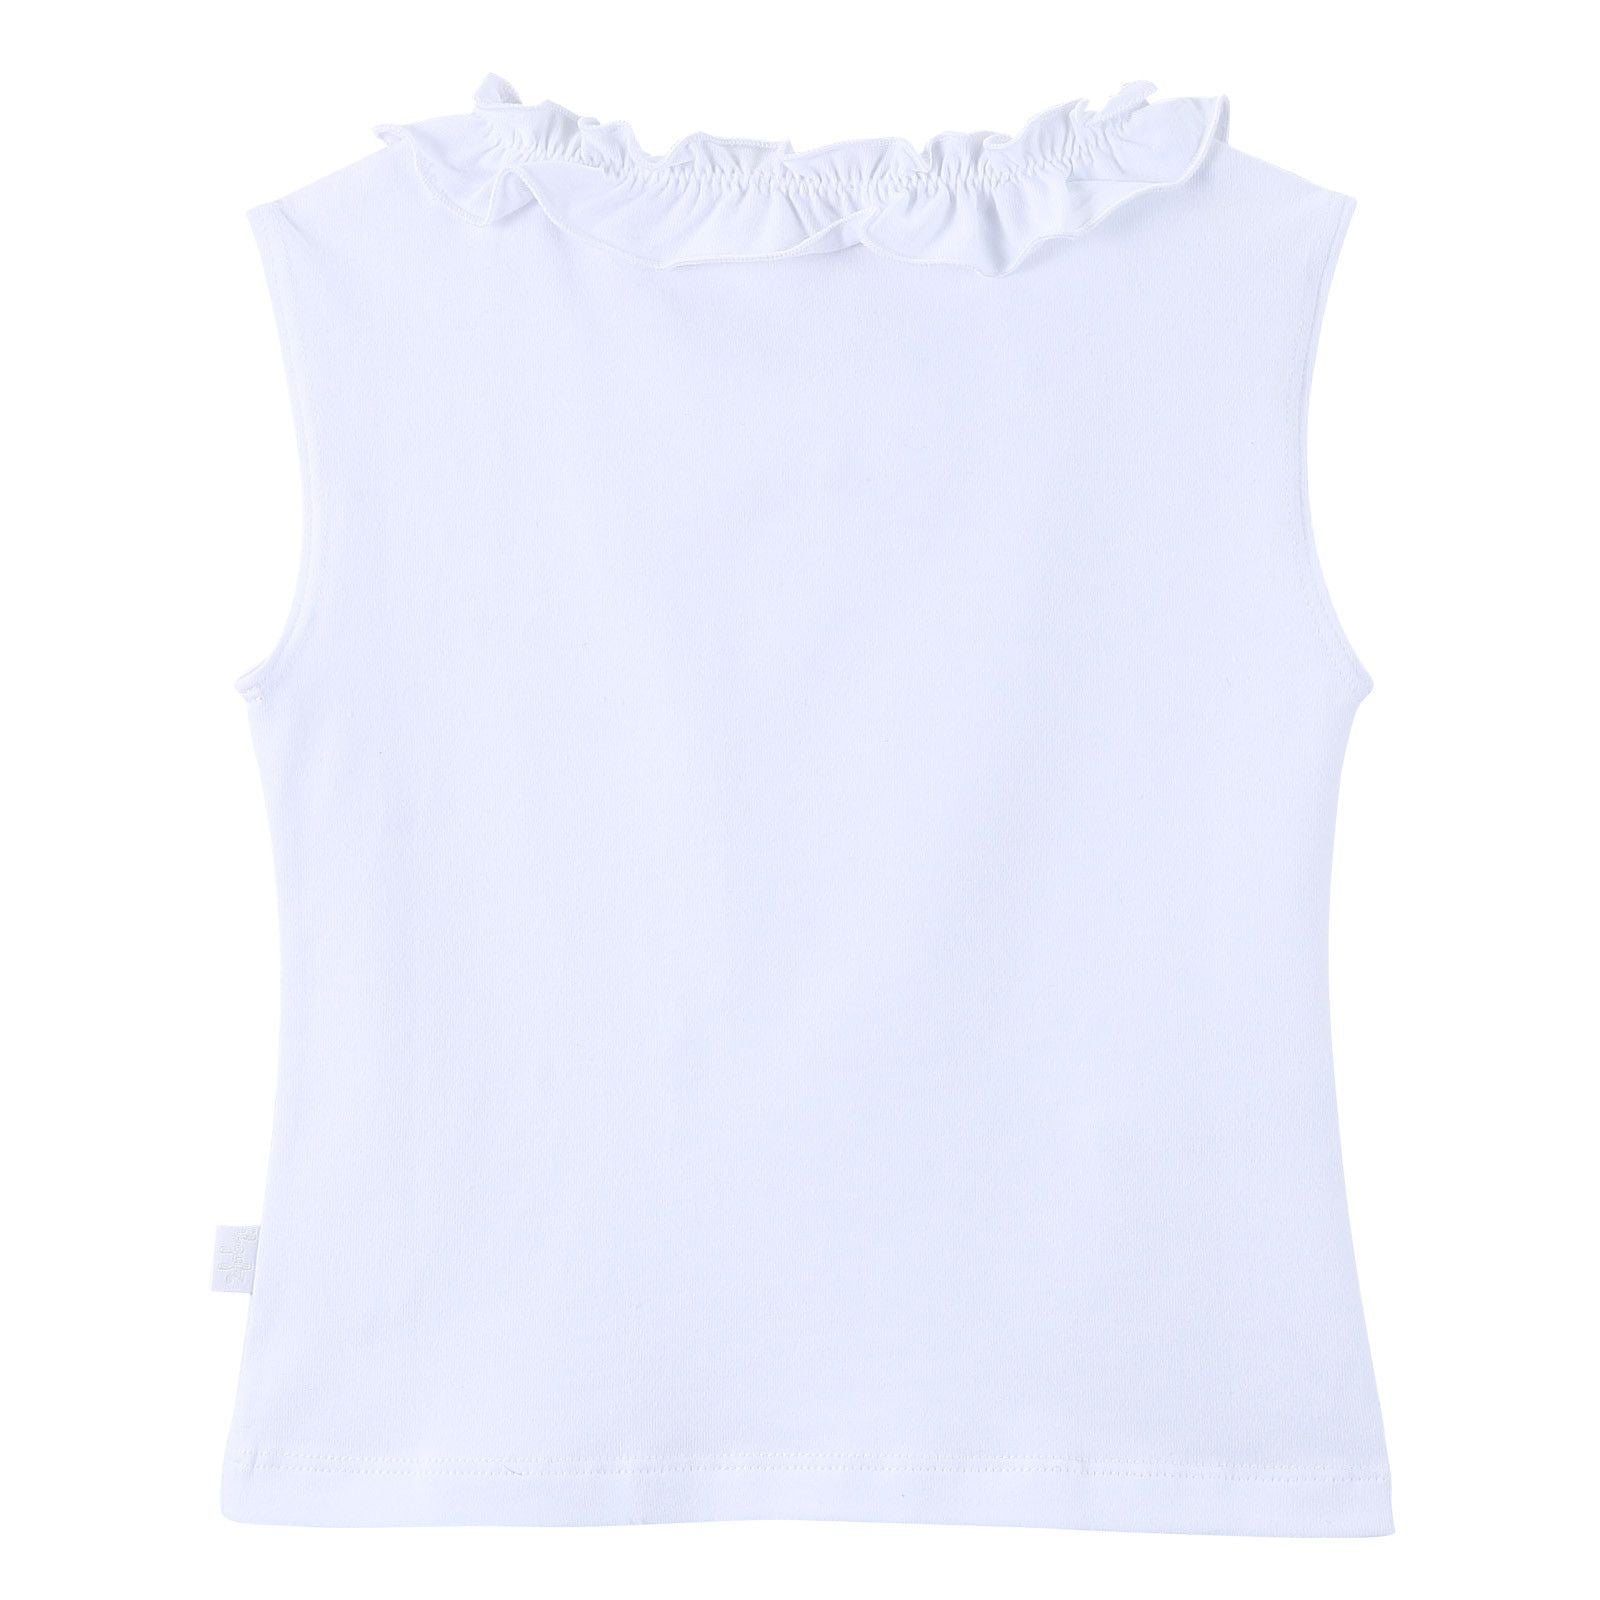 Girls White Cotton T-Shirt With Lace Collar - CÉMAROSE | Children's Fashion Store - 2